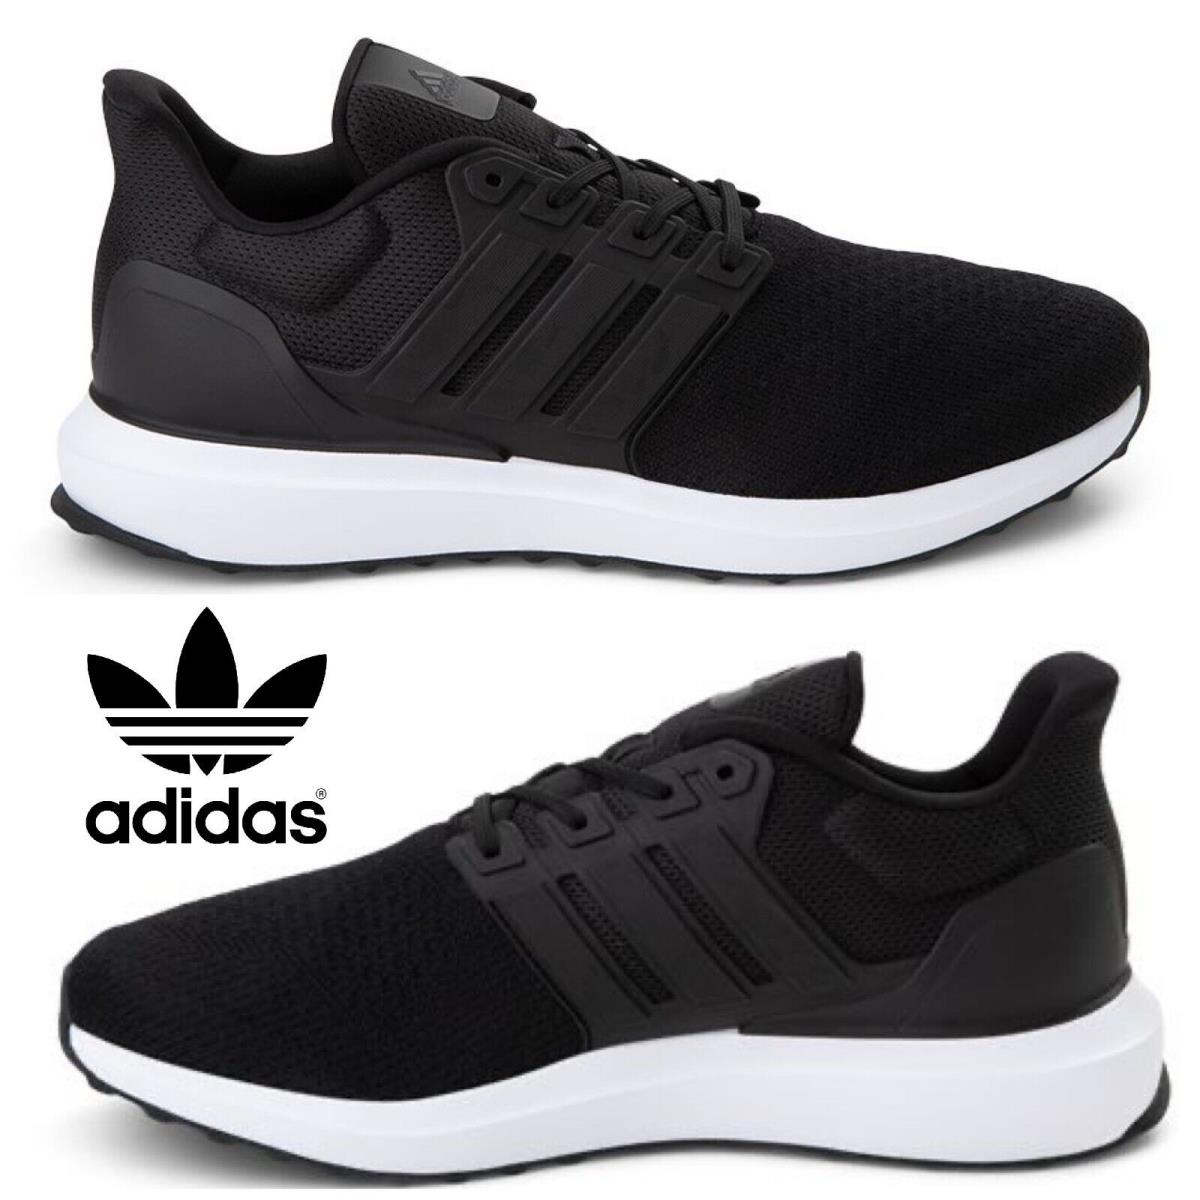 Adidas Ubounce Dna Men`s Sneakers Comfort Sport Casual Running Shoes Black White